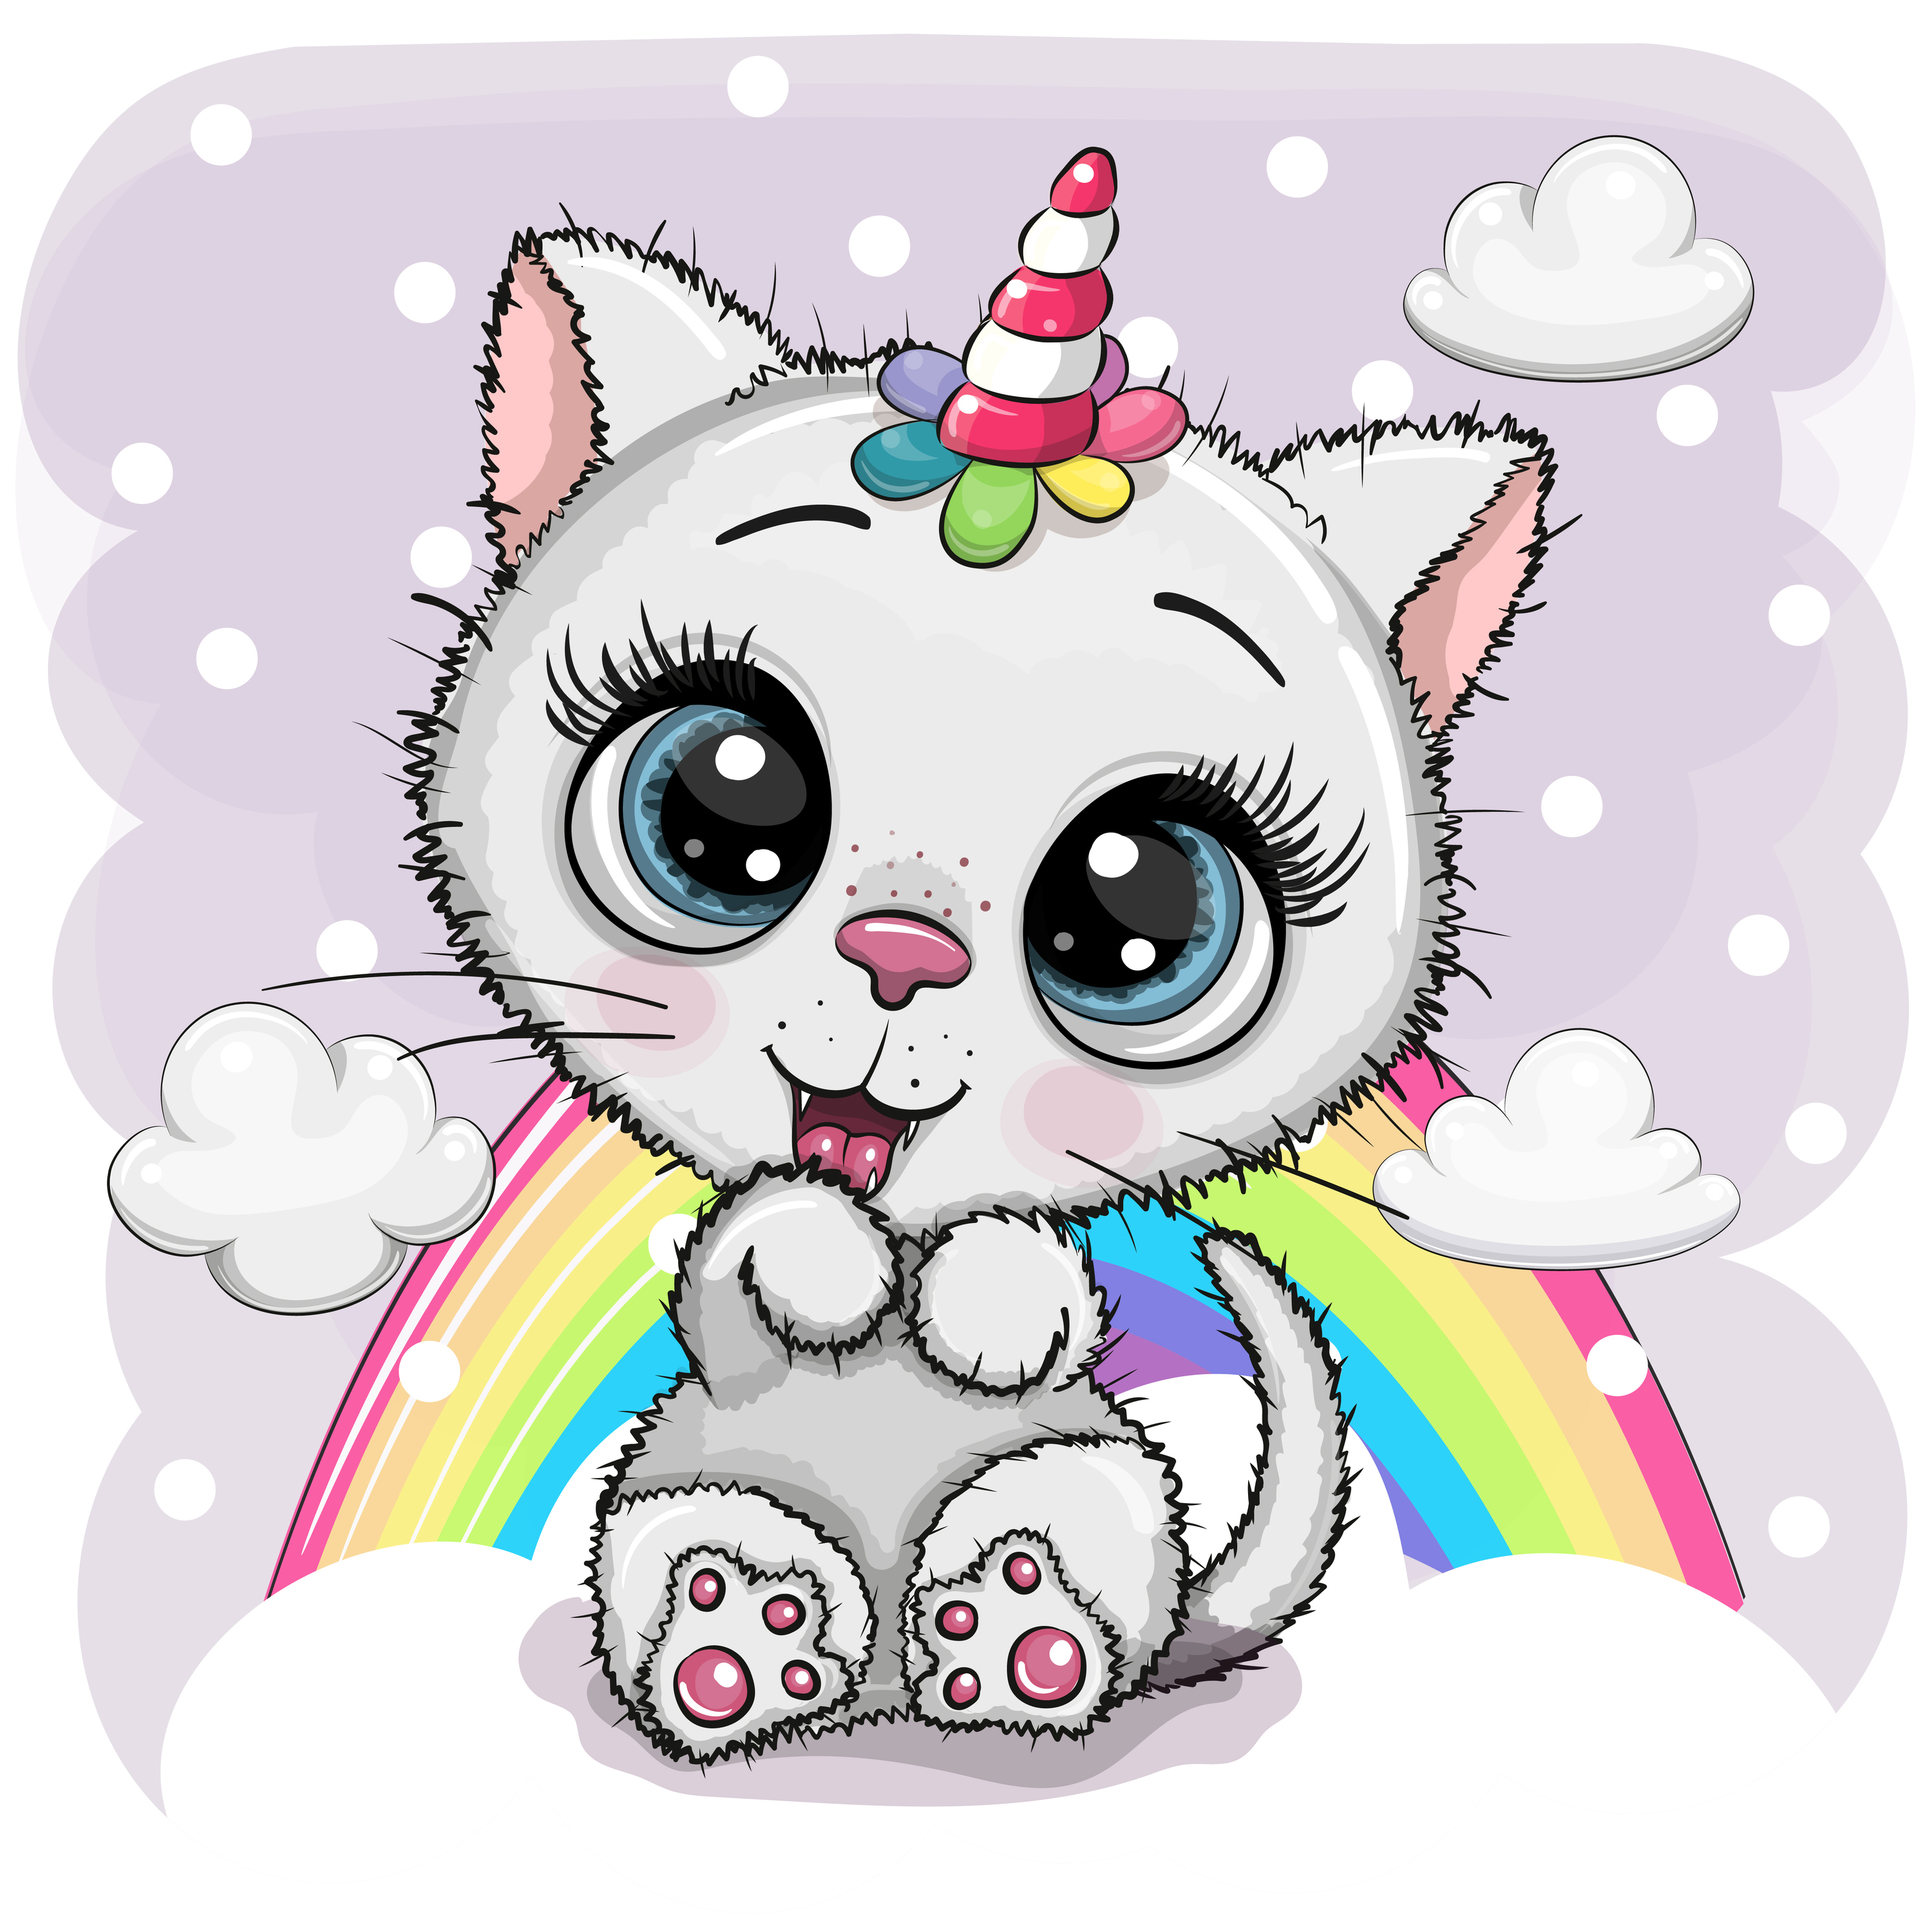 Cute Cartoon White Kitten With The Horn Of A Unicorn On Clouds Kramer